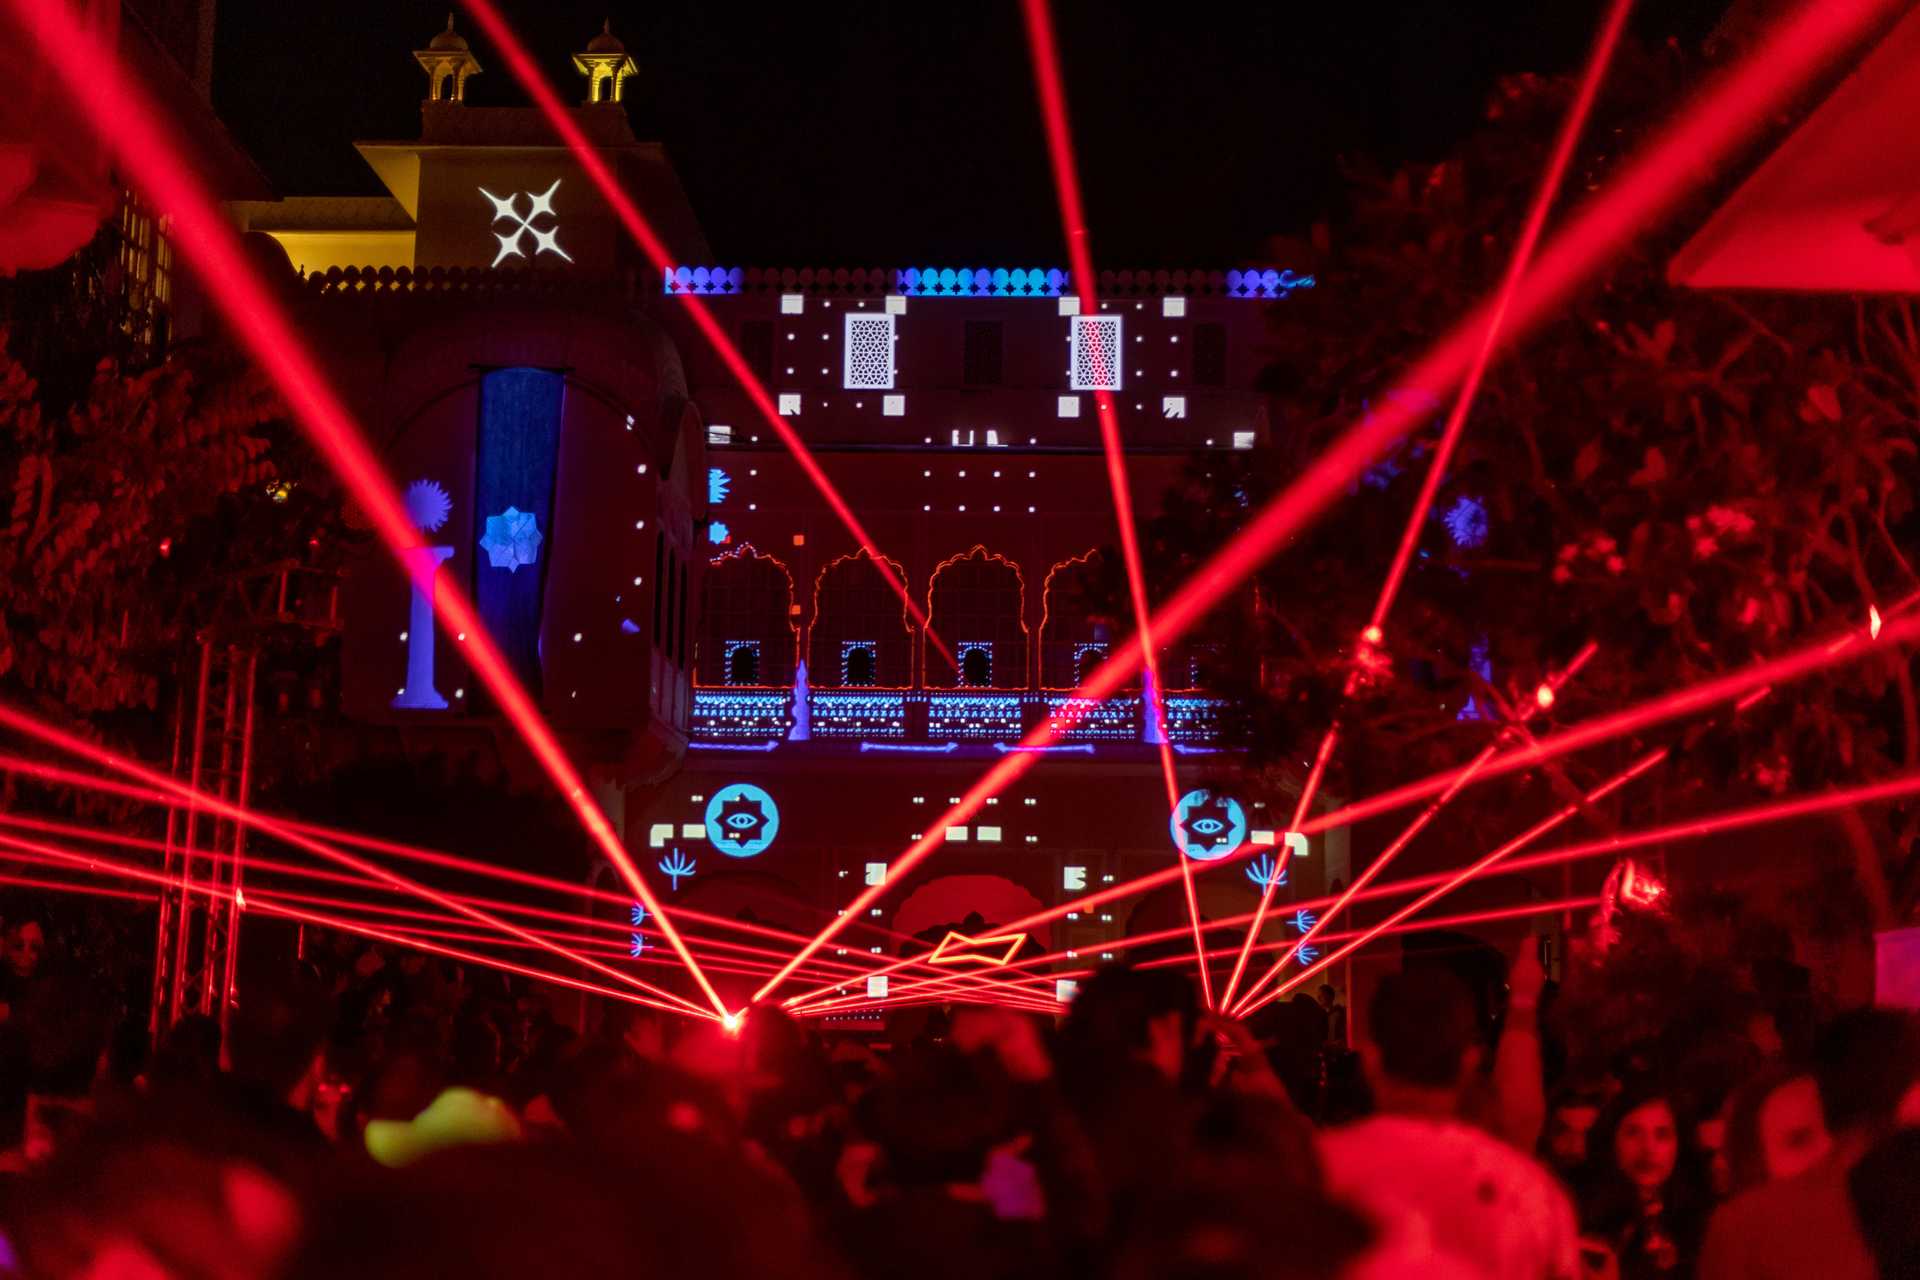 Lasers at the Budweiser North Stage - Image - Akash Oswal